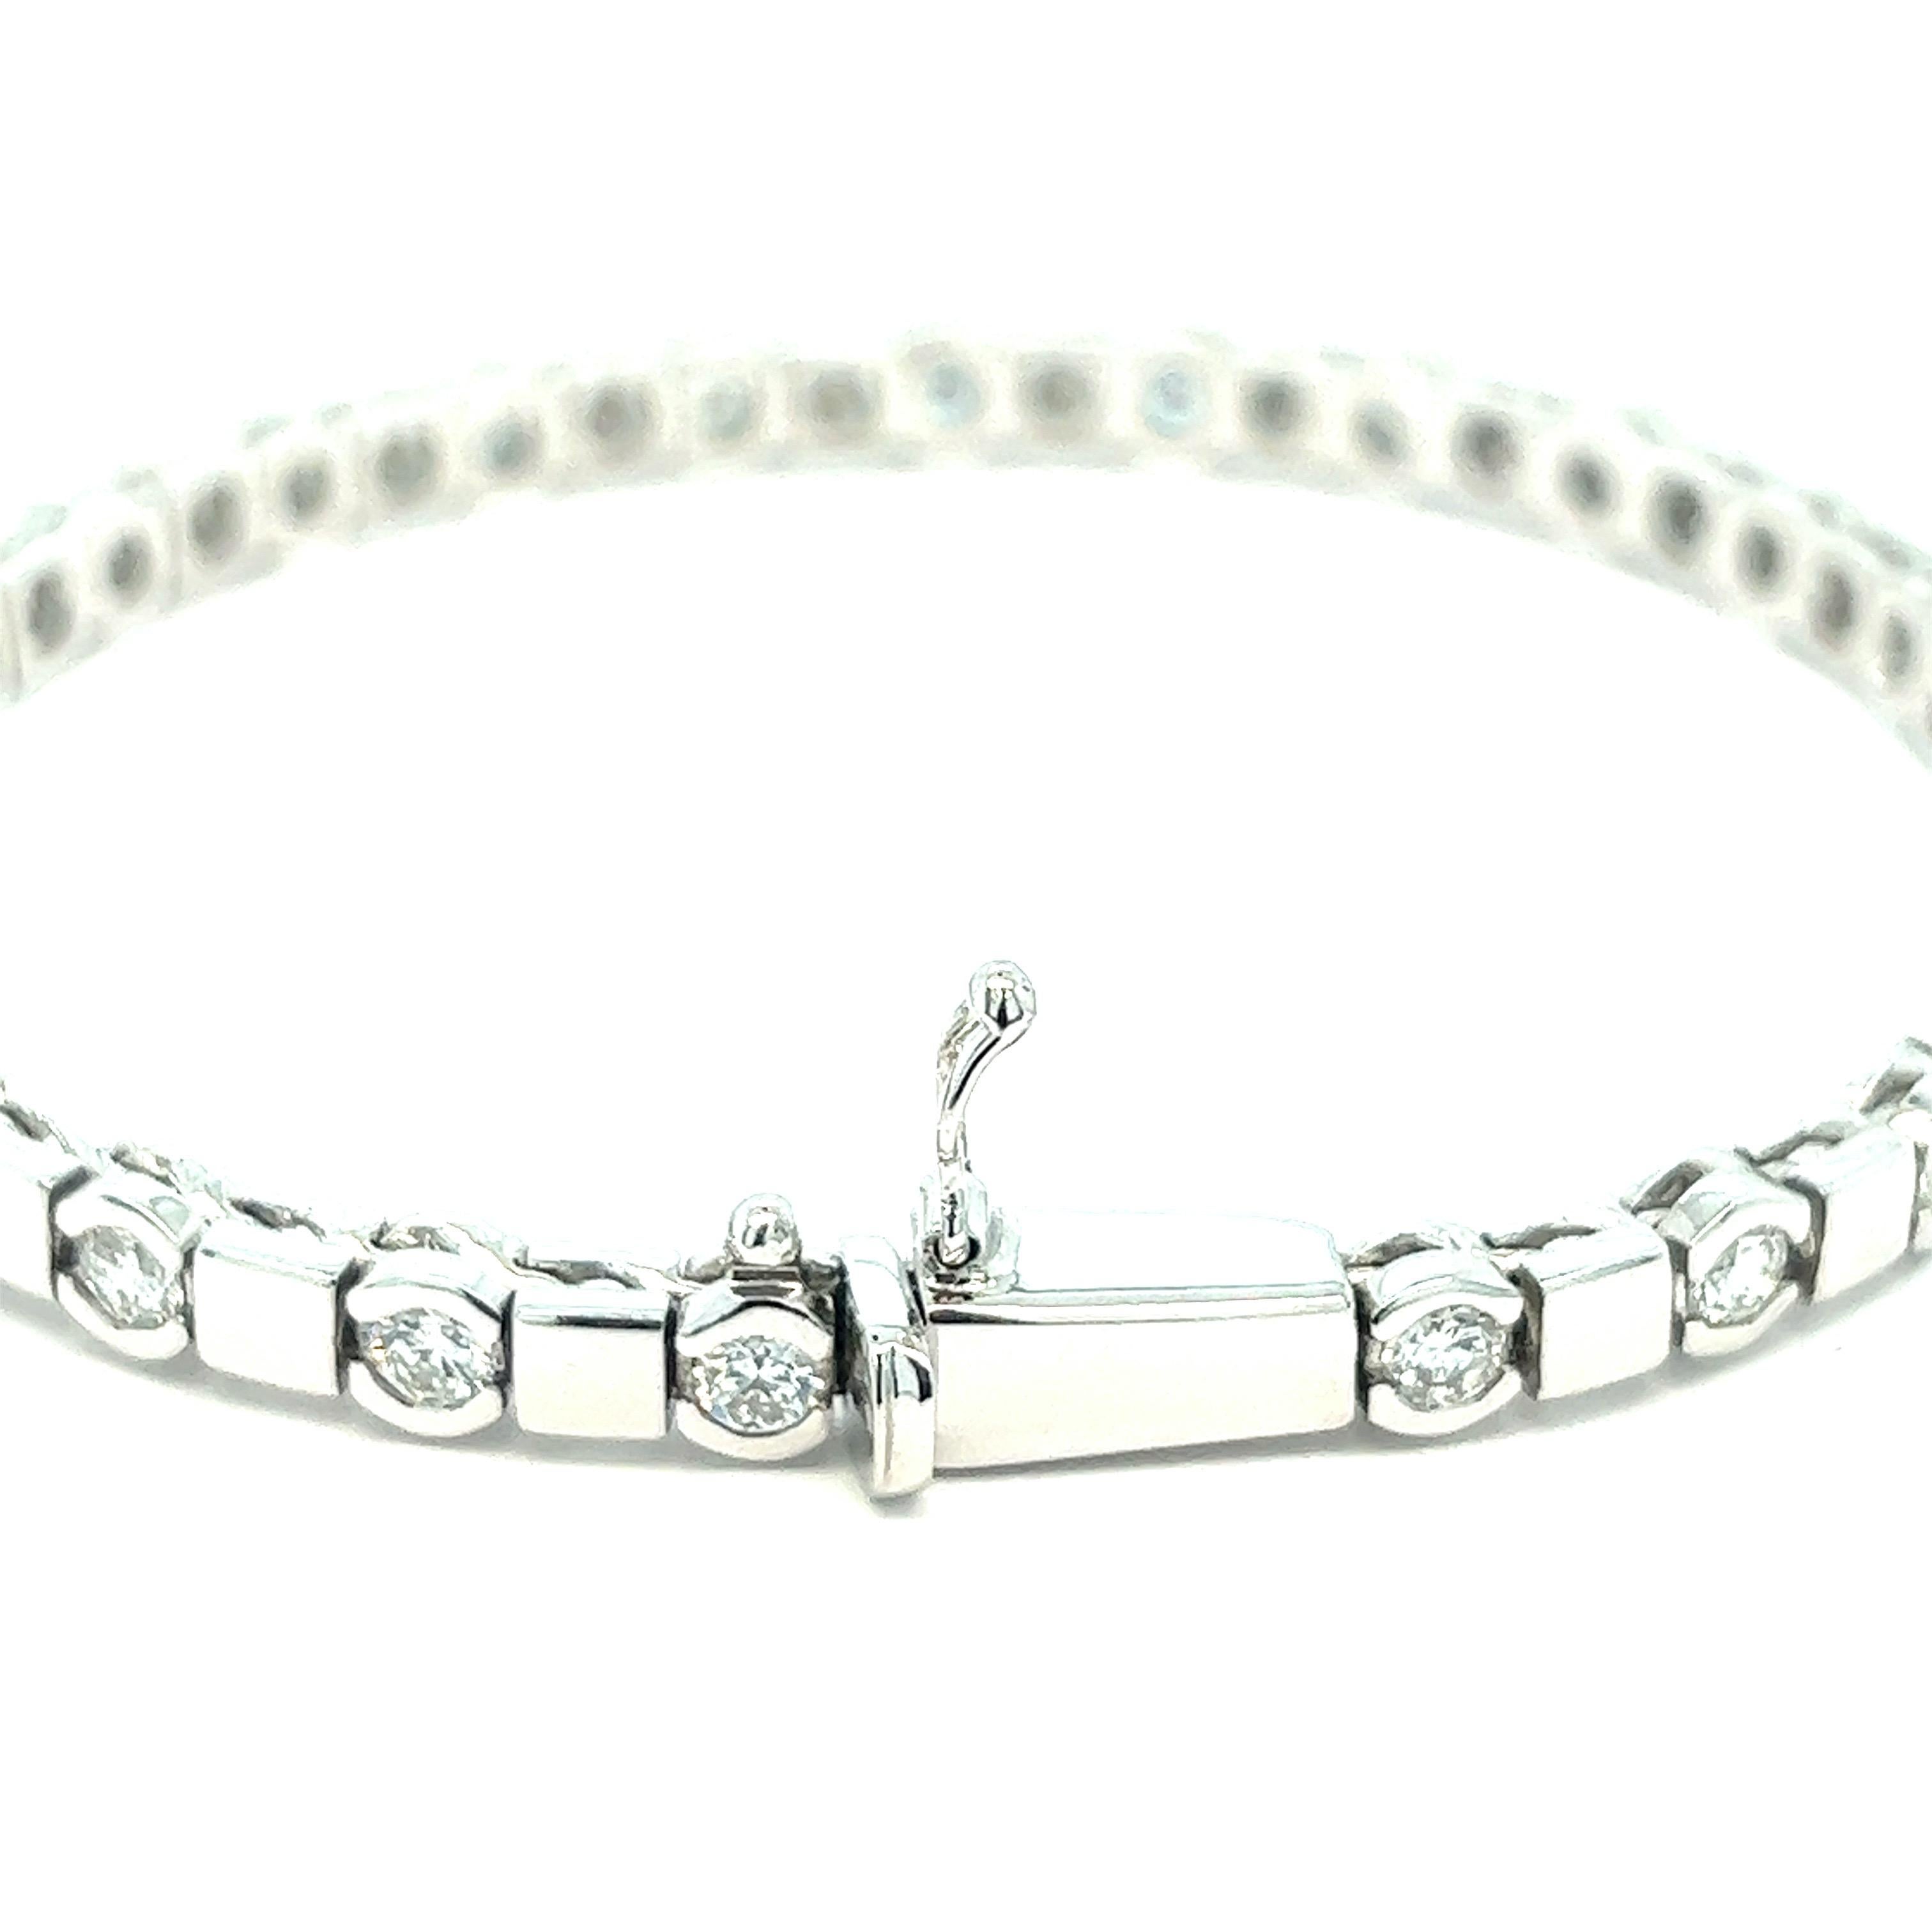 Diamond white gold bracelet, made in Italy

Very nice and white round-cut diamonds of 2.50 carats, 18 karat white gold; marked 750, Recarlo 

Size: width 0.31 inch, length 7.13 inches
Total weight: 20.0 grams